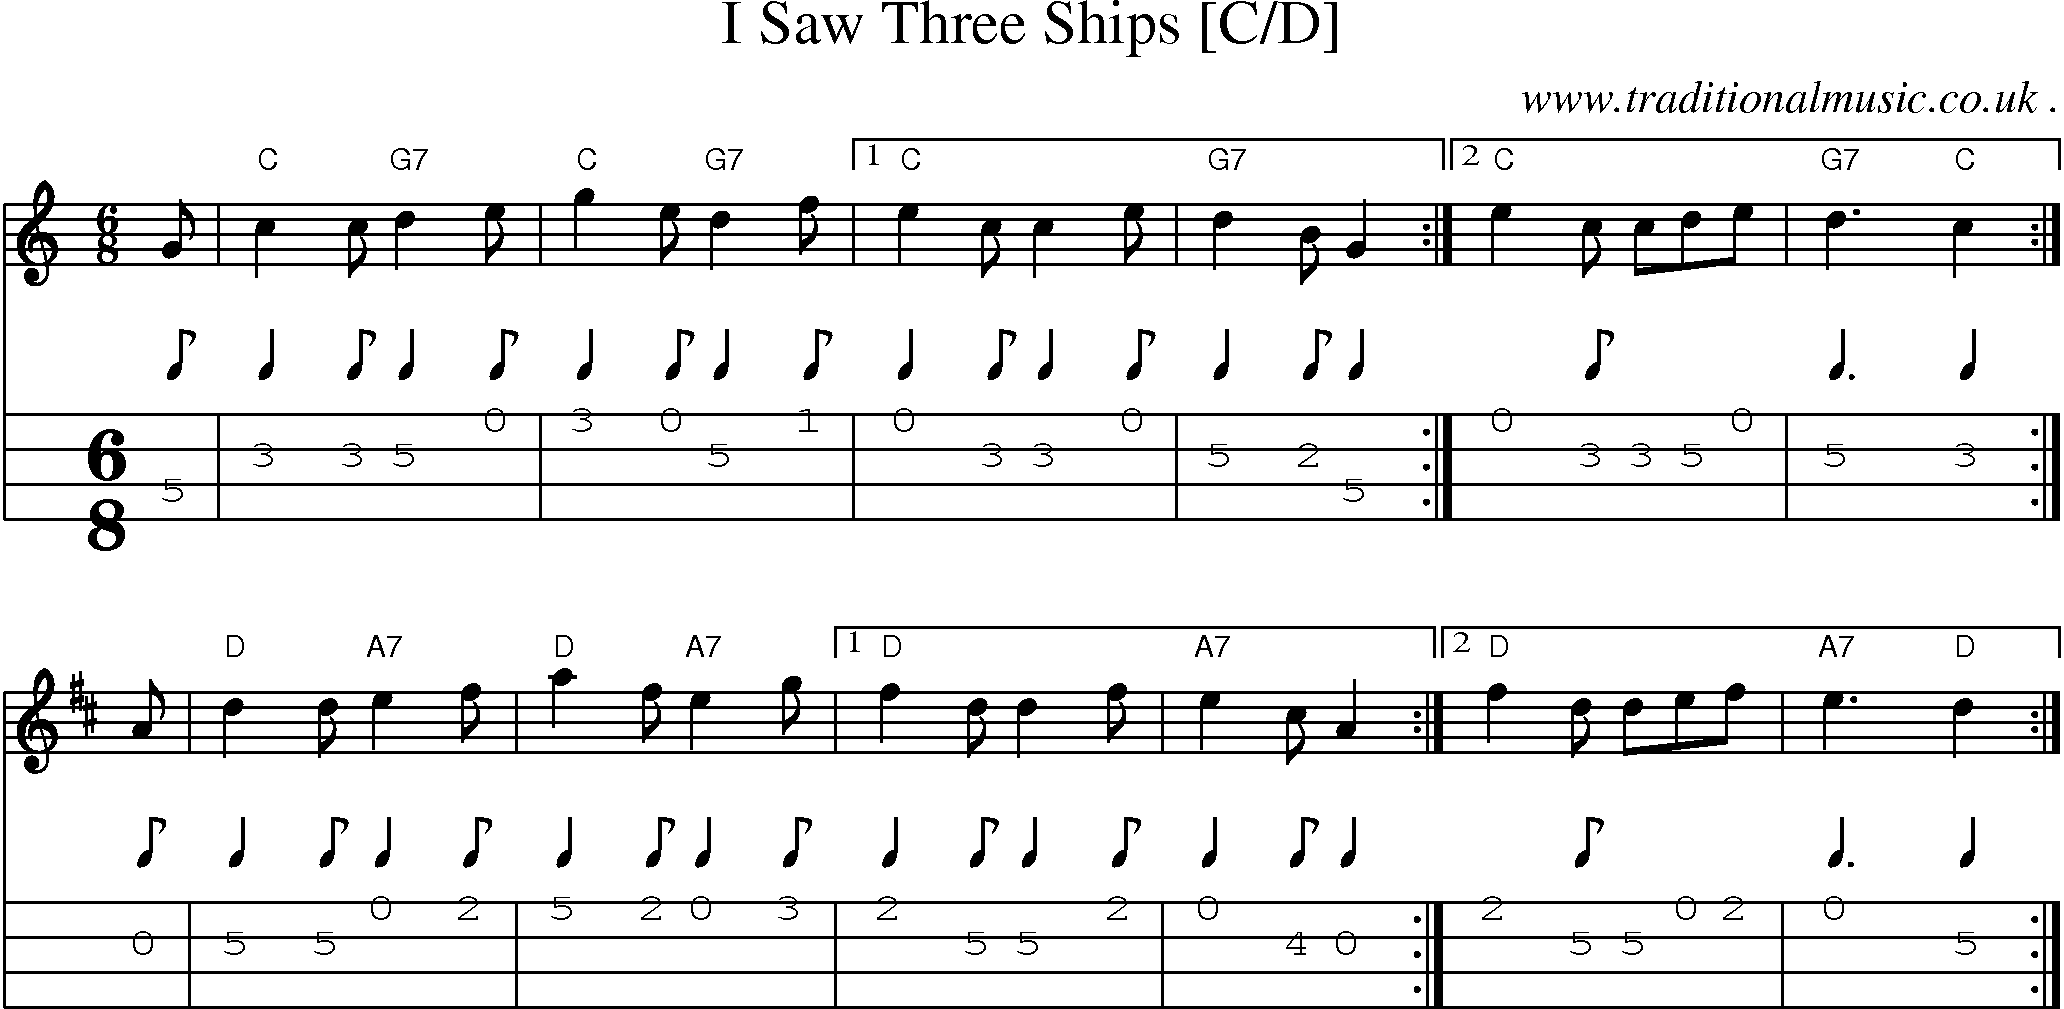 Sheet-music  score, Chords and Mandolin Tabs for I Saw Three Ships [cd]